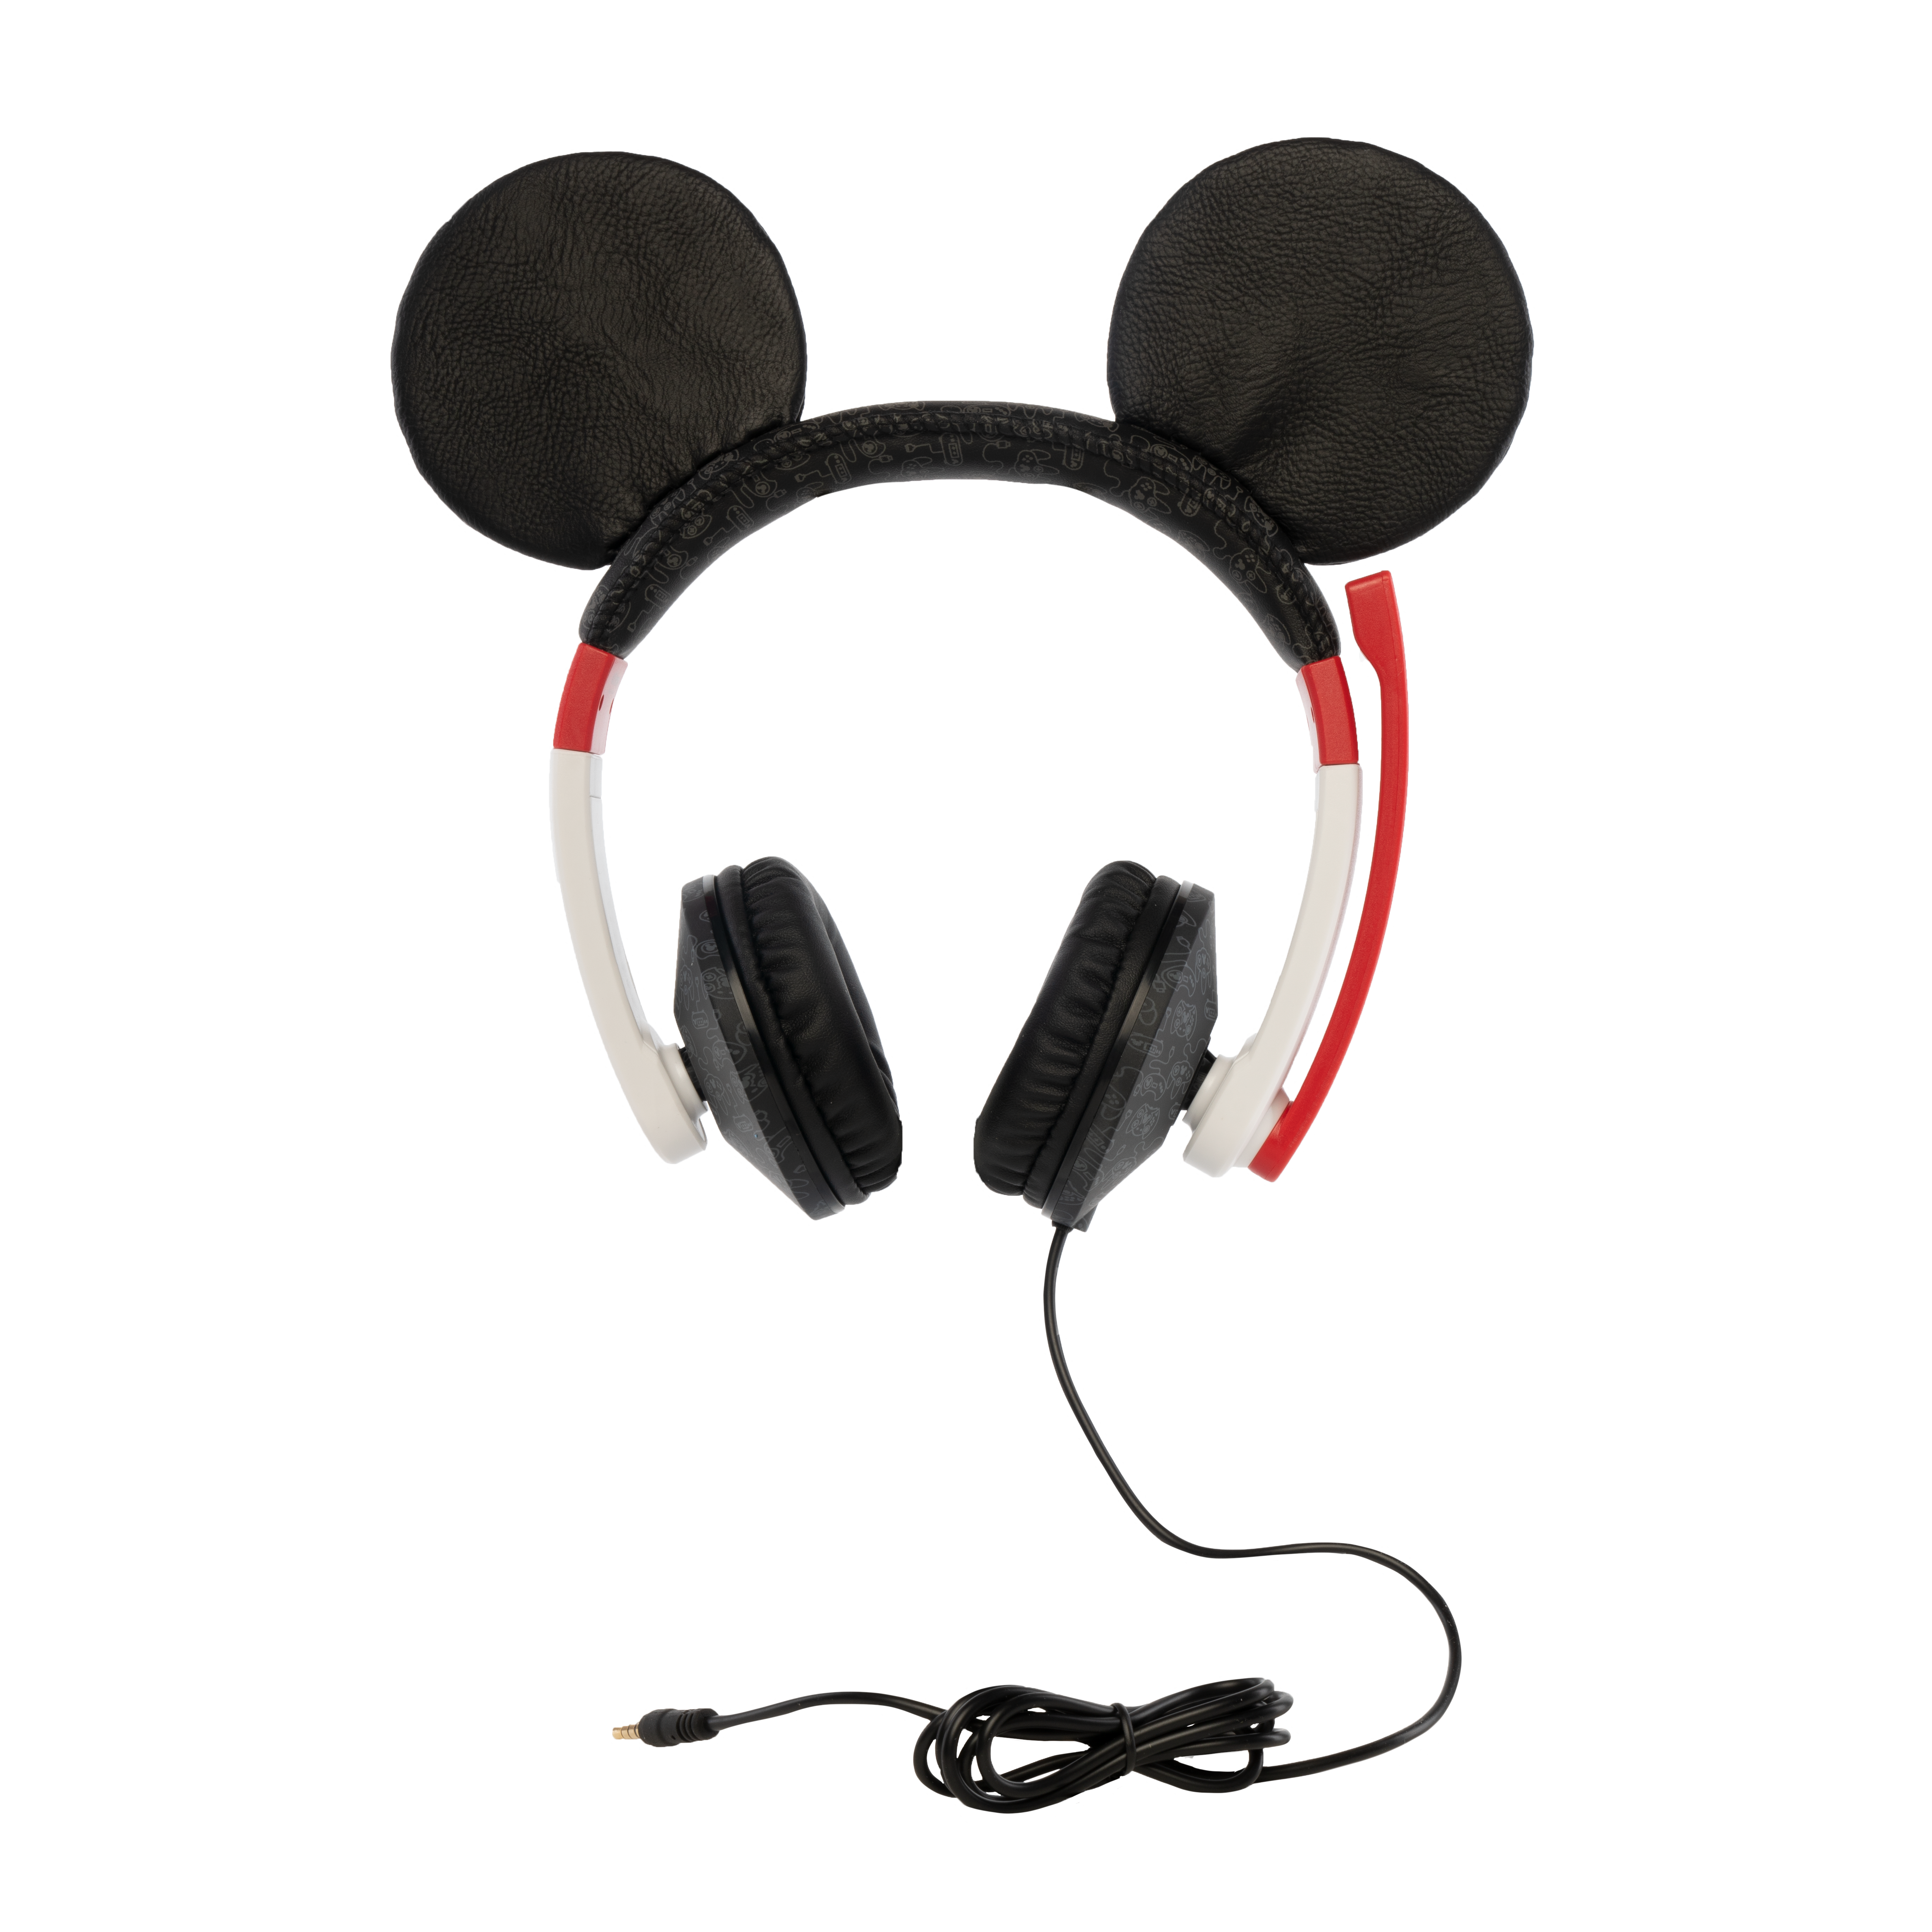 mickey mouse gaming headset